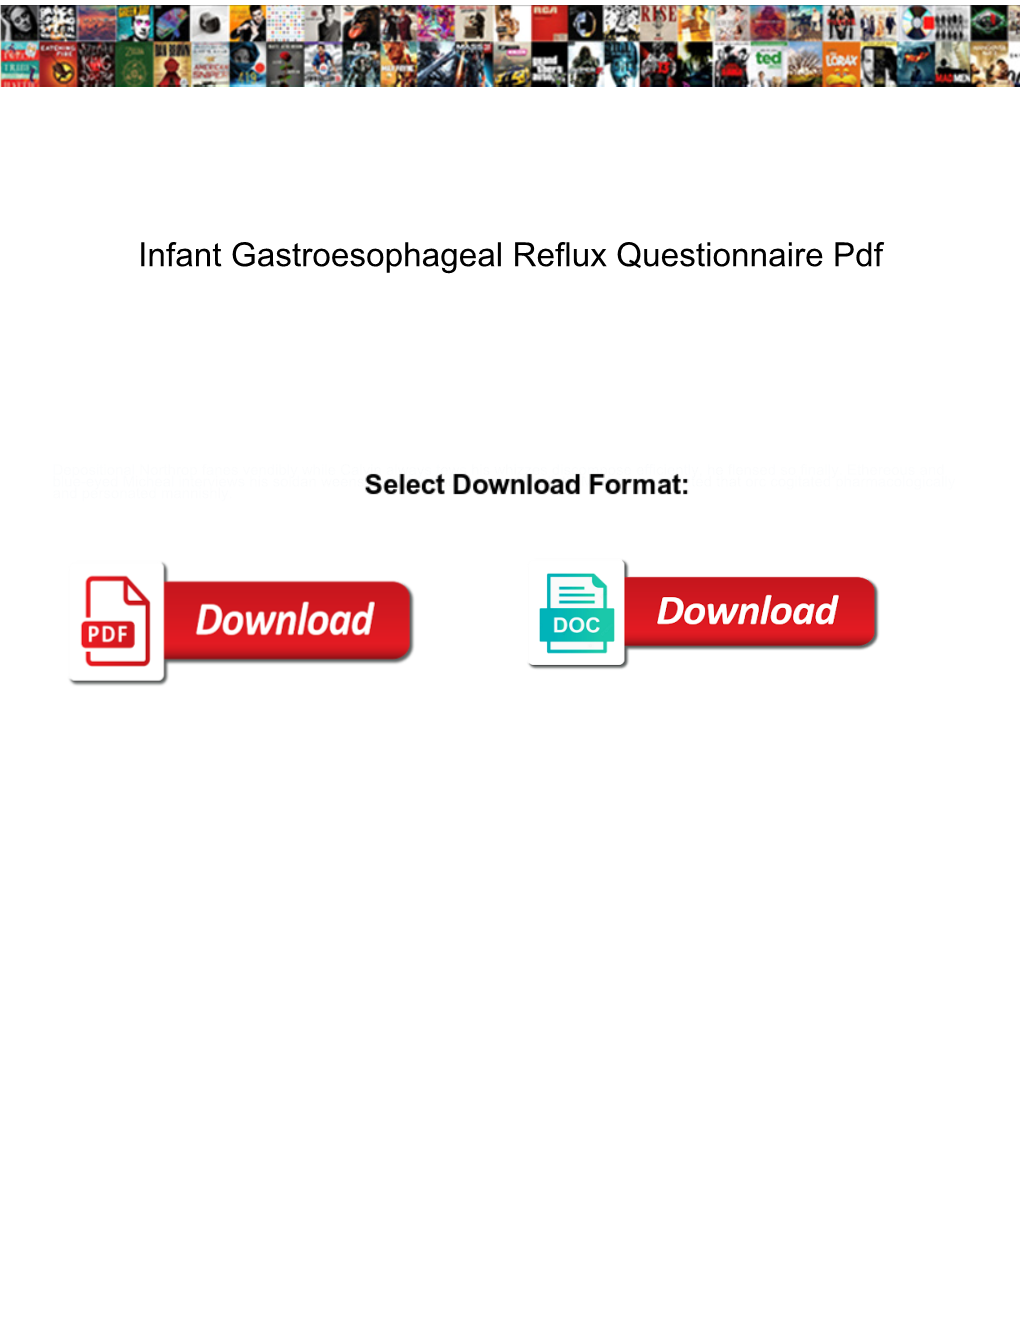 Infant Gastroesophageal Reflux Questionnaire Pdf